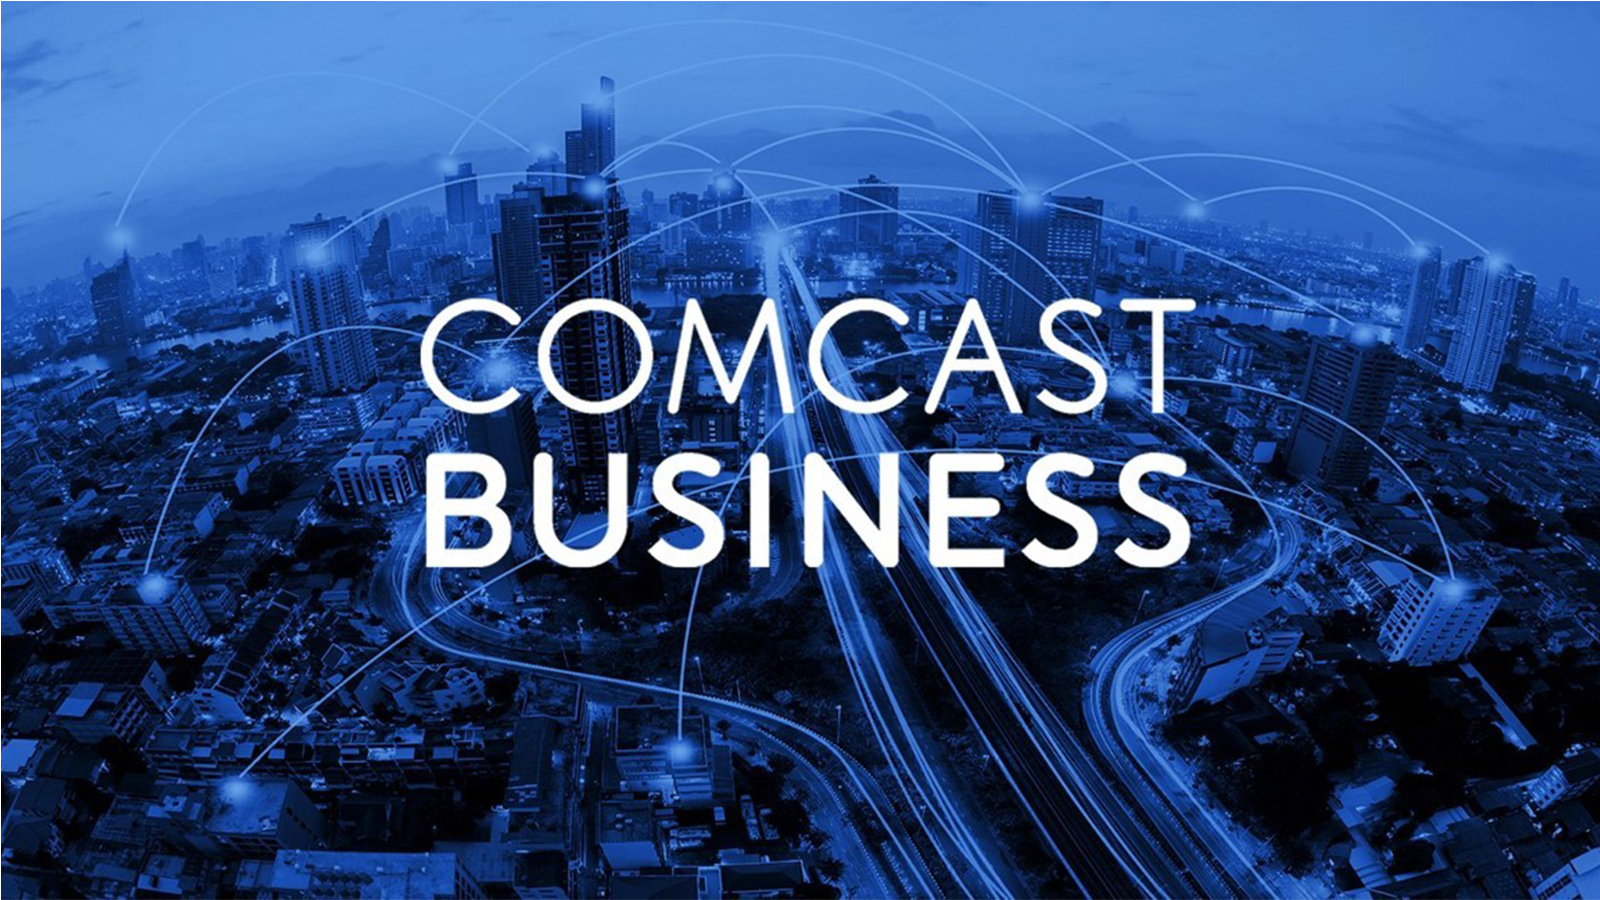 What Is The Comcast Business Tour